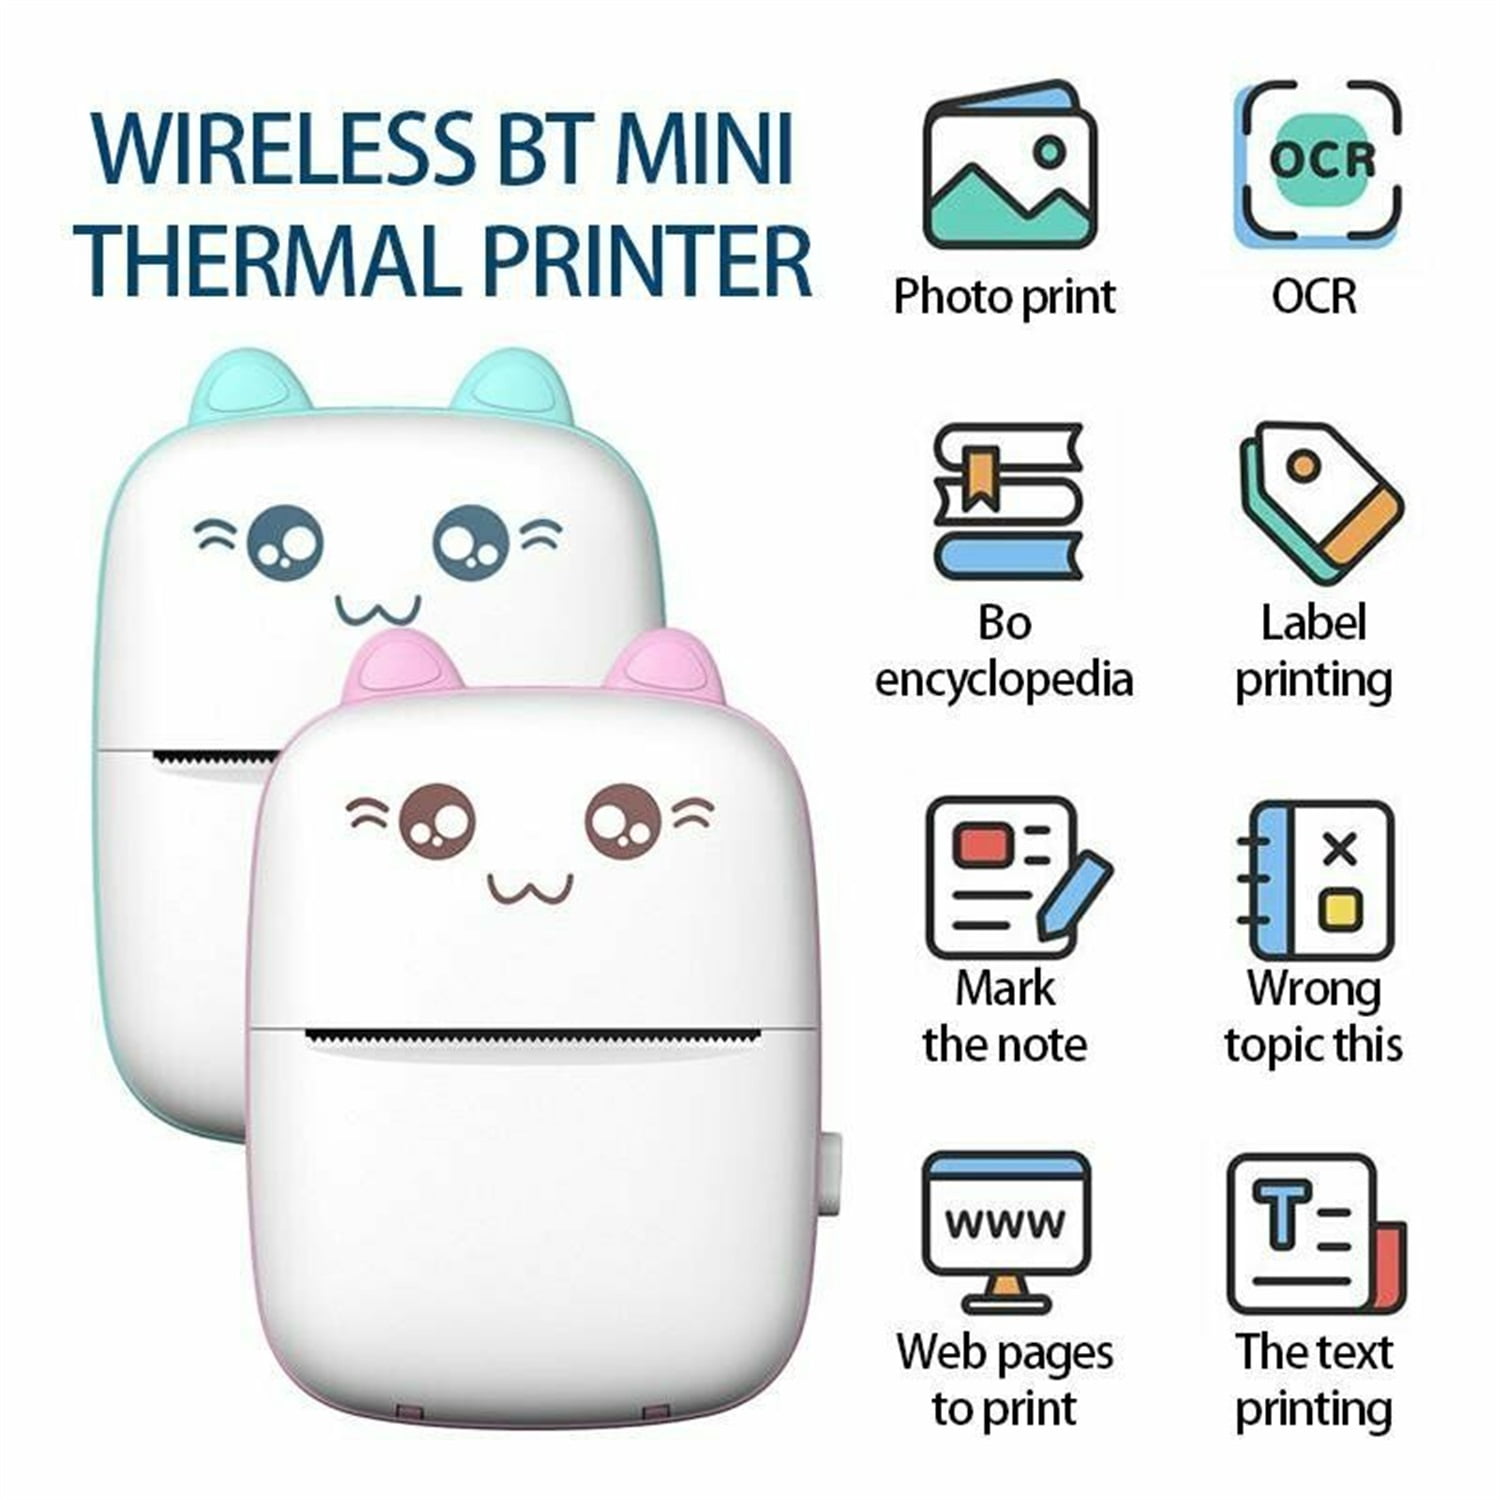 Journal Mobile Printer Received Printer with USB Cable,Compatible with for Learning Assistance Wireless Thermal Picture Printer Work Fun Pocket Printer Mini Photo Printer Study Notes